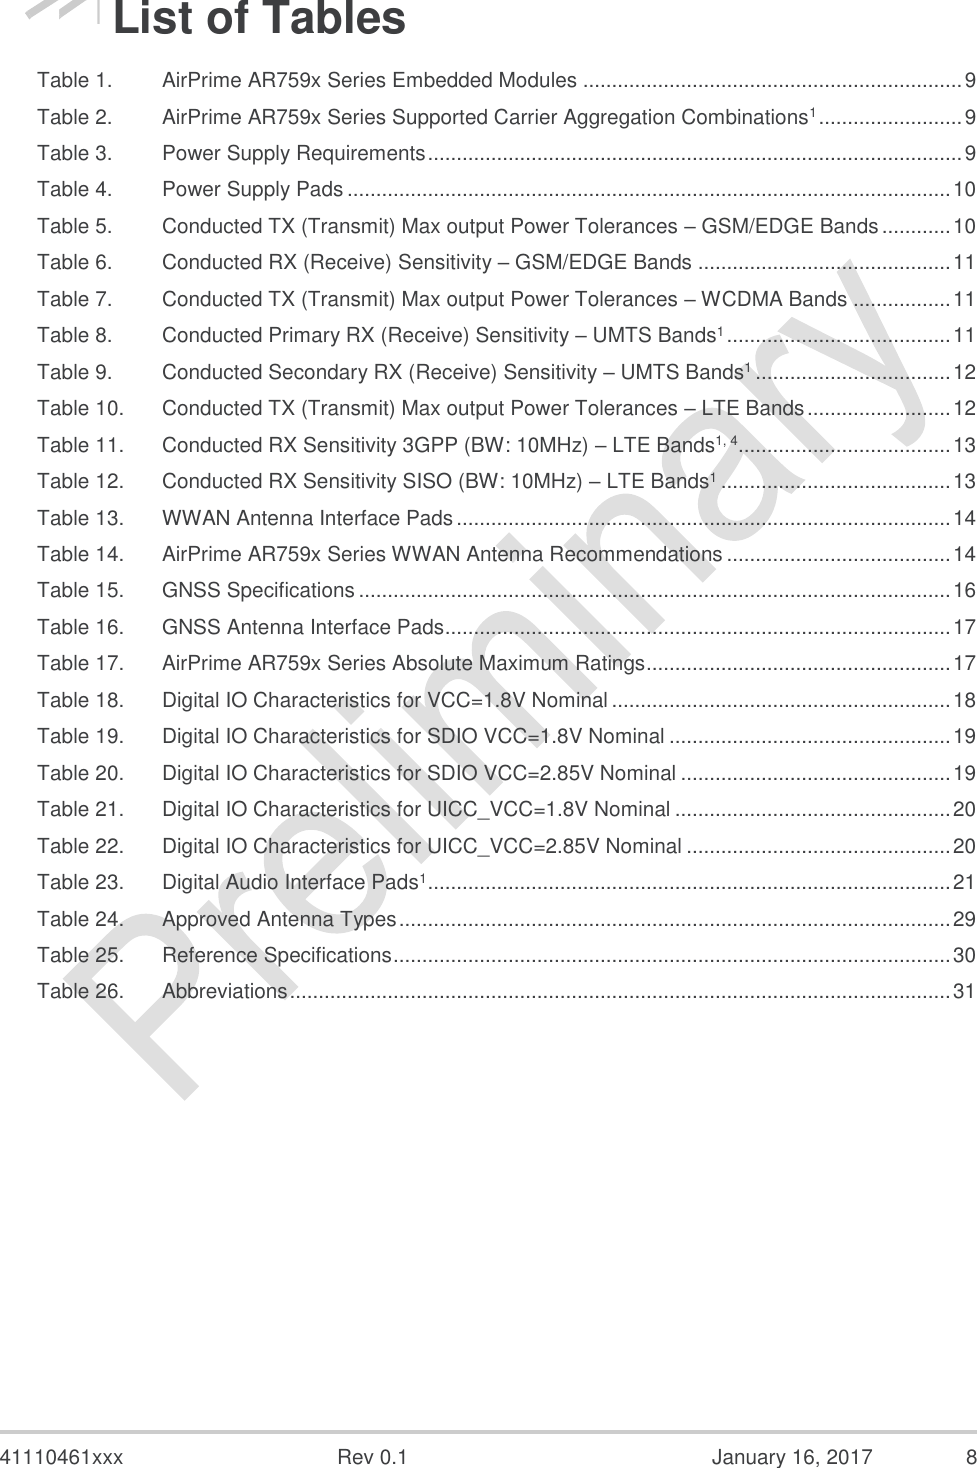  41110461xxx  Rev 0.1  January 16, 2017  8 List of Tables Table 1. AirPrime AR759x Series Embedded Modules .................................................................. 9 Table 2. AirPrime AR759x Series Supported Carrier Aggregation Combinations1 ......................... 9 Table 3. Power Supply Requirements ............................................................................................. 9 Table 4. Power Supply Pads ......................................................................................................... 10 Table 5. Conducted TX (Transmit) Max output Power Tolerances – GSM/EDGE Bands ............ 10 Table 6. Conducted RX (Receive) Sensitivity – GSM/EDGE Bands ............................................ 11 Table 7. Conducted TX (Transmit) Max output Power Tolerances – WCDMA Bands ................. 11 Table 8. Conducted Primary RX (Receive) Sensitivity – UMTS Bands1 ....................................... 11 Table 9. Conducted Secondary RX (Receive) Sensitivity – UMTS Bands1 .................................. 12 Table 10. Conducted TX (Transmit) Max output Power Tolerances – LTE Bands ......................... 12 Table 11. Conducted RX Sensitivity 3GPP (BW: 10MHz) – LTE Bands1, 4..................................... 13 Table 12. Conducted RX Sensitivity SISO (BW: 10MHz) – LTE Bands1 ........................................ 13 Table 13. WWAN Antenna Interface Pads ...................................................................................... 14 Table 14. AirPrime AR759x Series WWAN Antenna Recommendations ....................................... 14 Table 15. GNSS Specifications ....................................................................................................... 16 Table 16. GNSS Antenna Interface Pads ........................................................................................ 17 Table 17. AirPrime AR759x Series Absolute Maximum Ratings..................................................... 17 Table 18. Digital IO Characteristics for VCC=1.8V Nominal ........................................................... 18 Table 19. Digital IO Characteristics for SDIO VCC=1.8V Nominal ................................................. 19 Table 20. Digital IO Characteristics for SDIO VCC=2.85V Nominal ............................................... 19 Table 21. Digital IO Characteristics for UICC_VCC=1.8V Nominal ................................................ 20 Table 22. Digital IO Characteristics for UICC_VCC=2.85V Nominal .............................................. 20 Table 23. Digital Audio Interface Pads1 ........................................................................................... 21 Table 24. Approved Antenna Types ................................................................................................ 29 Table 25. Reference Specifications ................................................................................................. 30 Table 26. Abbreviations ................................................................................................................... 31  